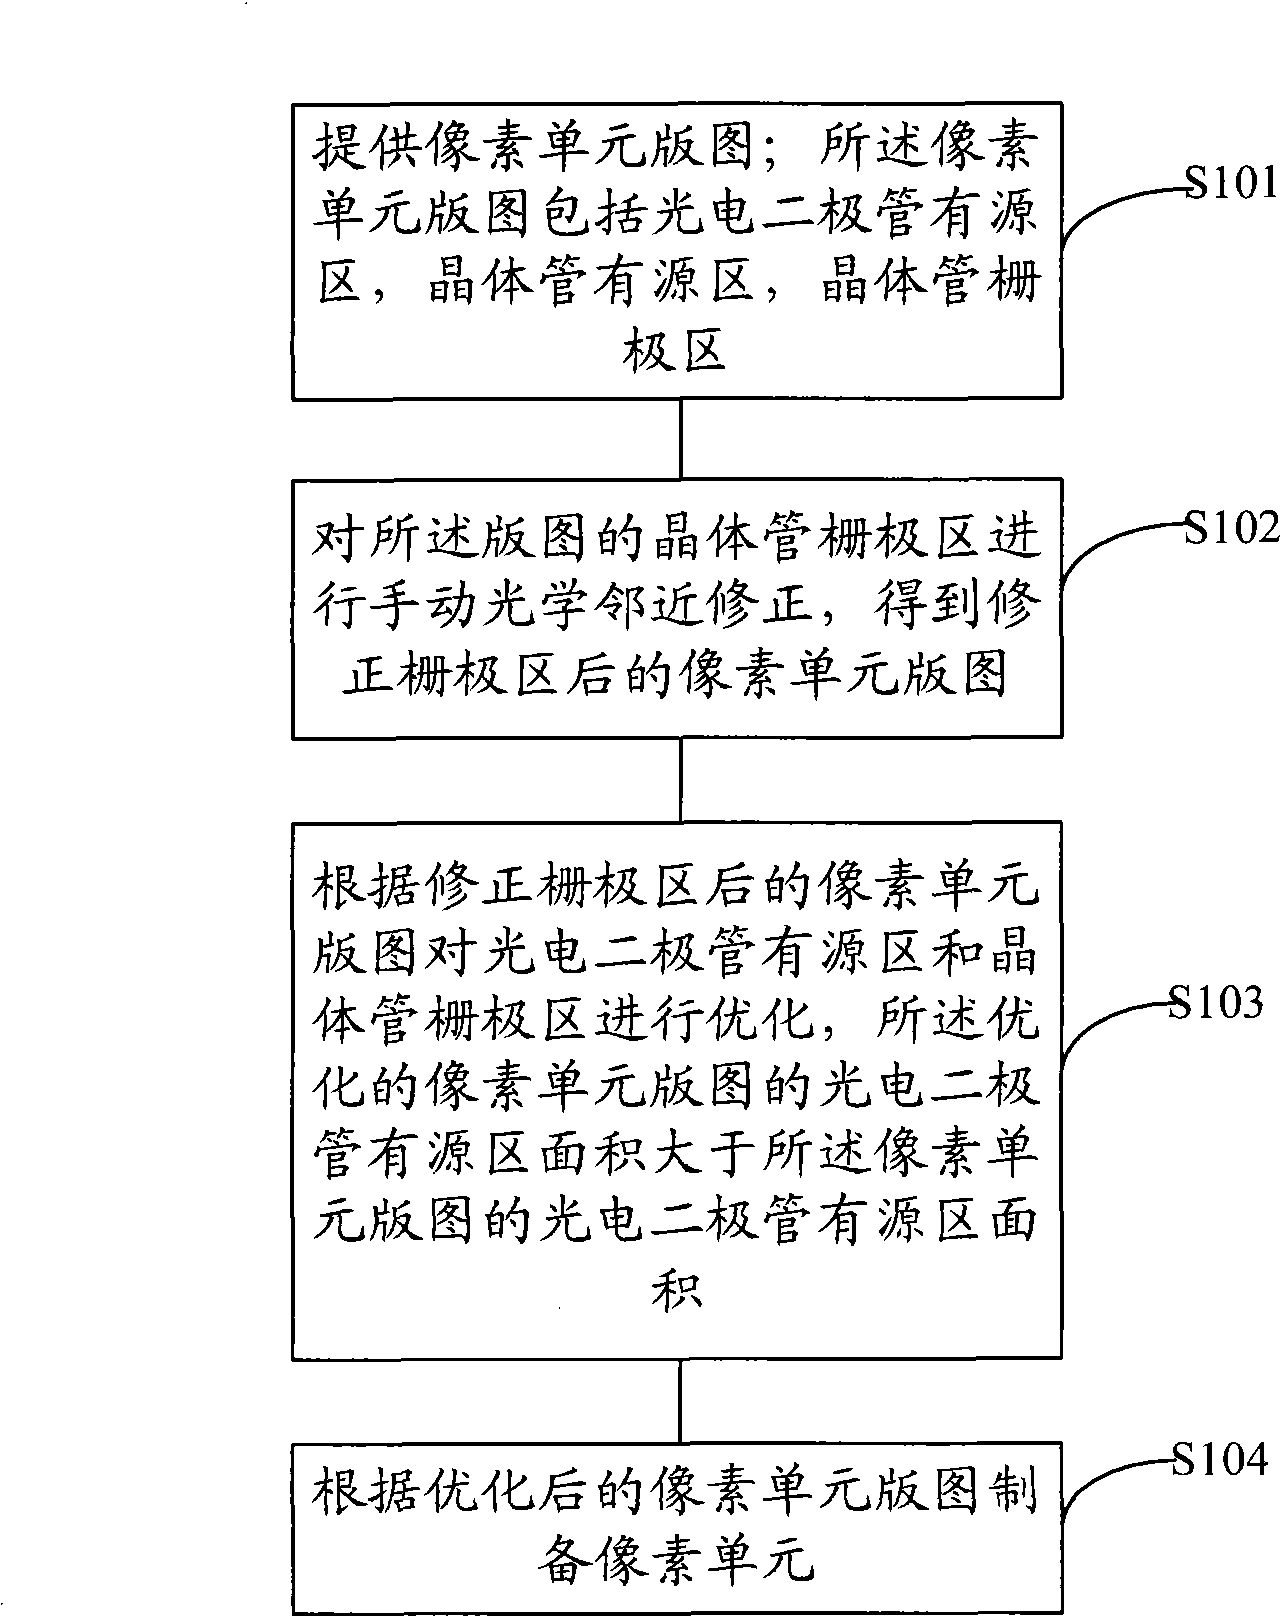 Manufacture method of CMOS (Complementary Metal Oxide Semiconductor) image sensor